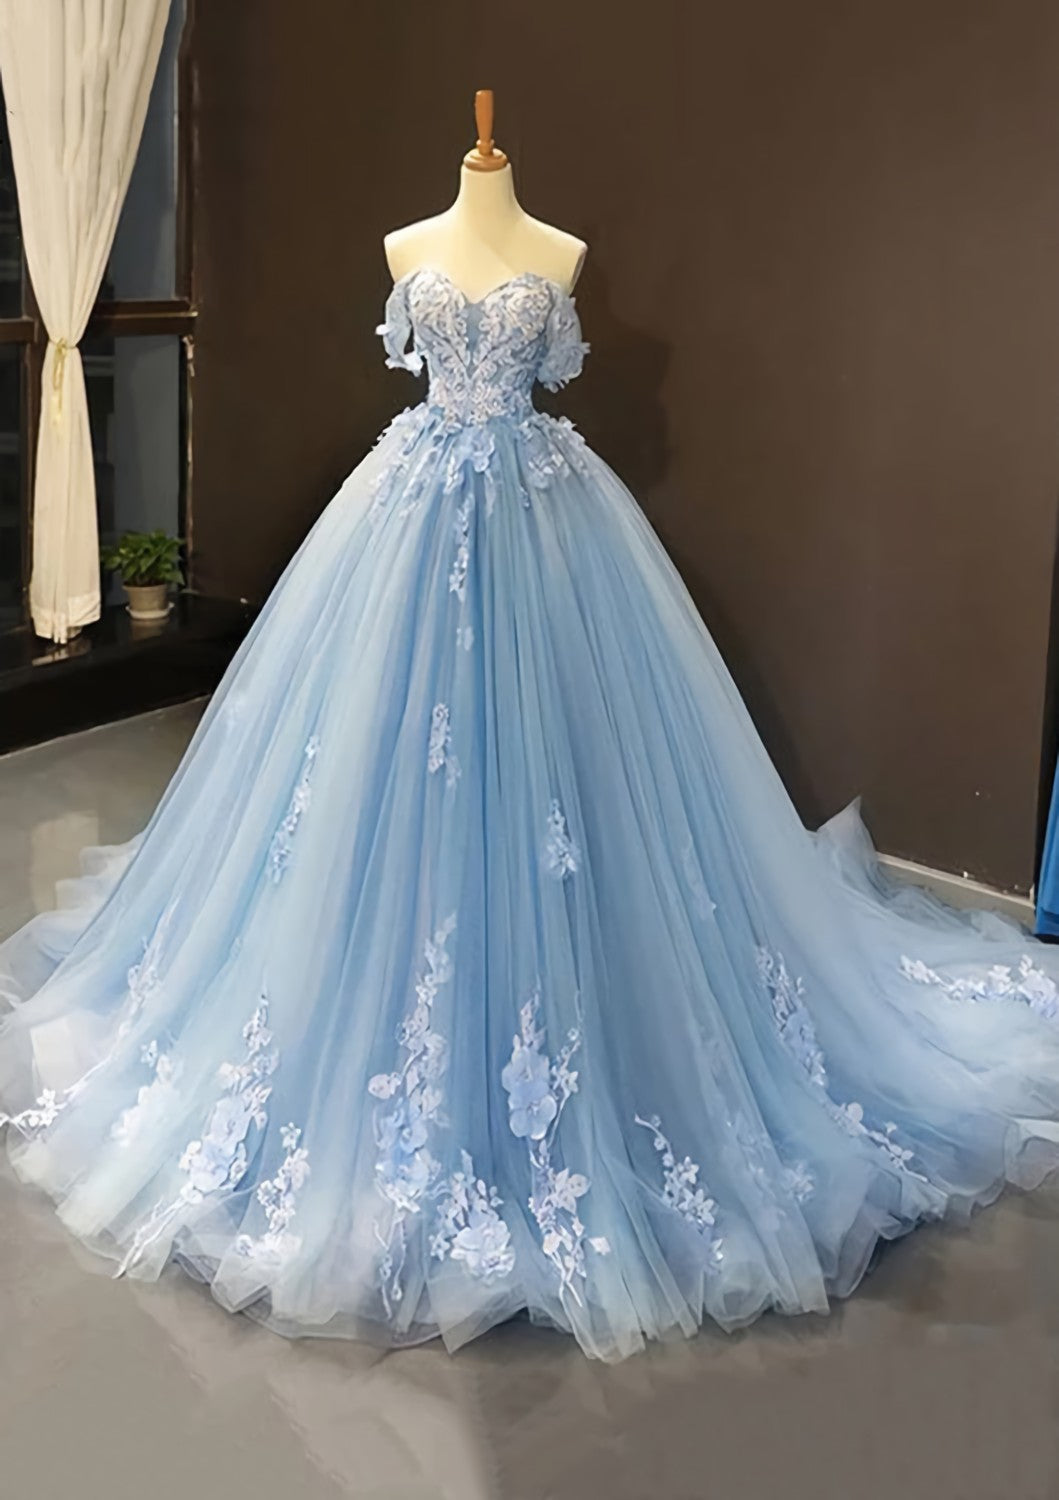 Prom Dresses For Adults, Ball Gown Off-the-Shoulder Sweep Train Tulle Prom Dress With Appliqued